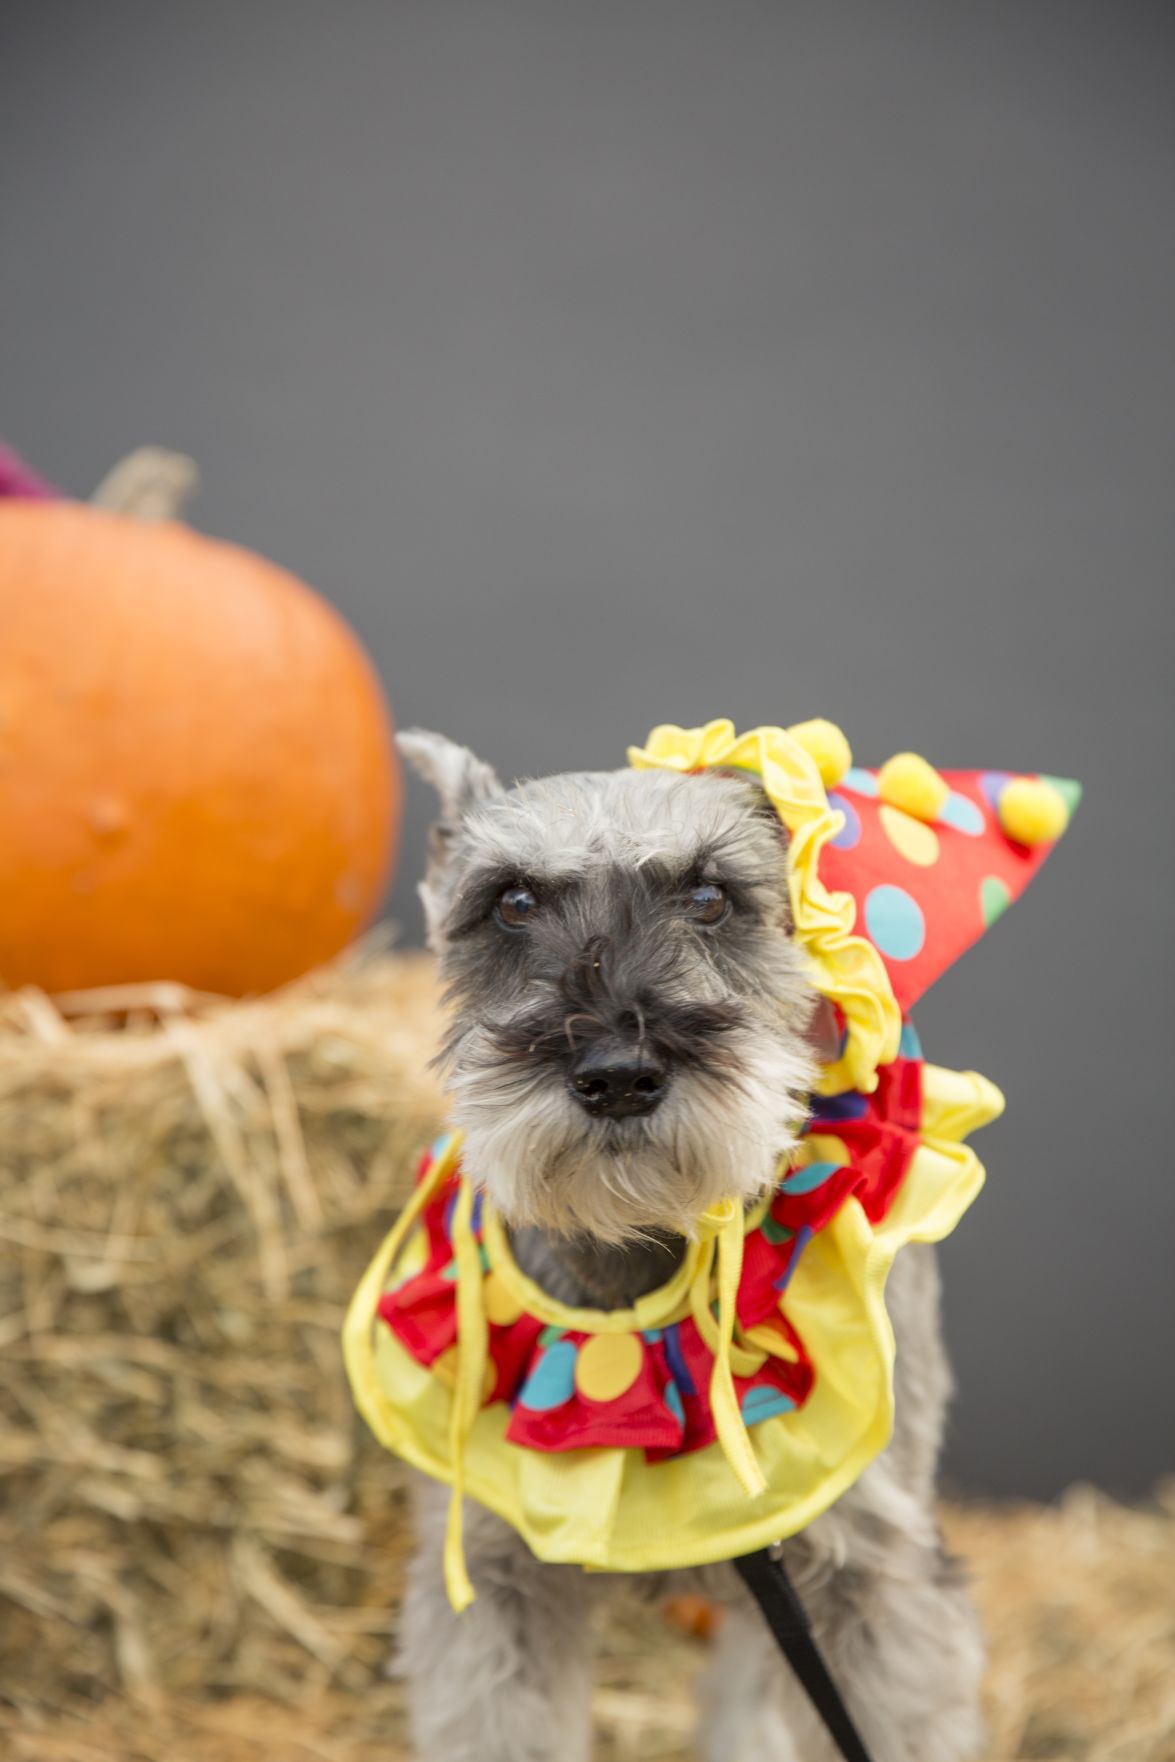 See photos of dogs dressed up as pirates, police officers